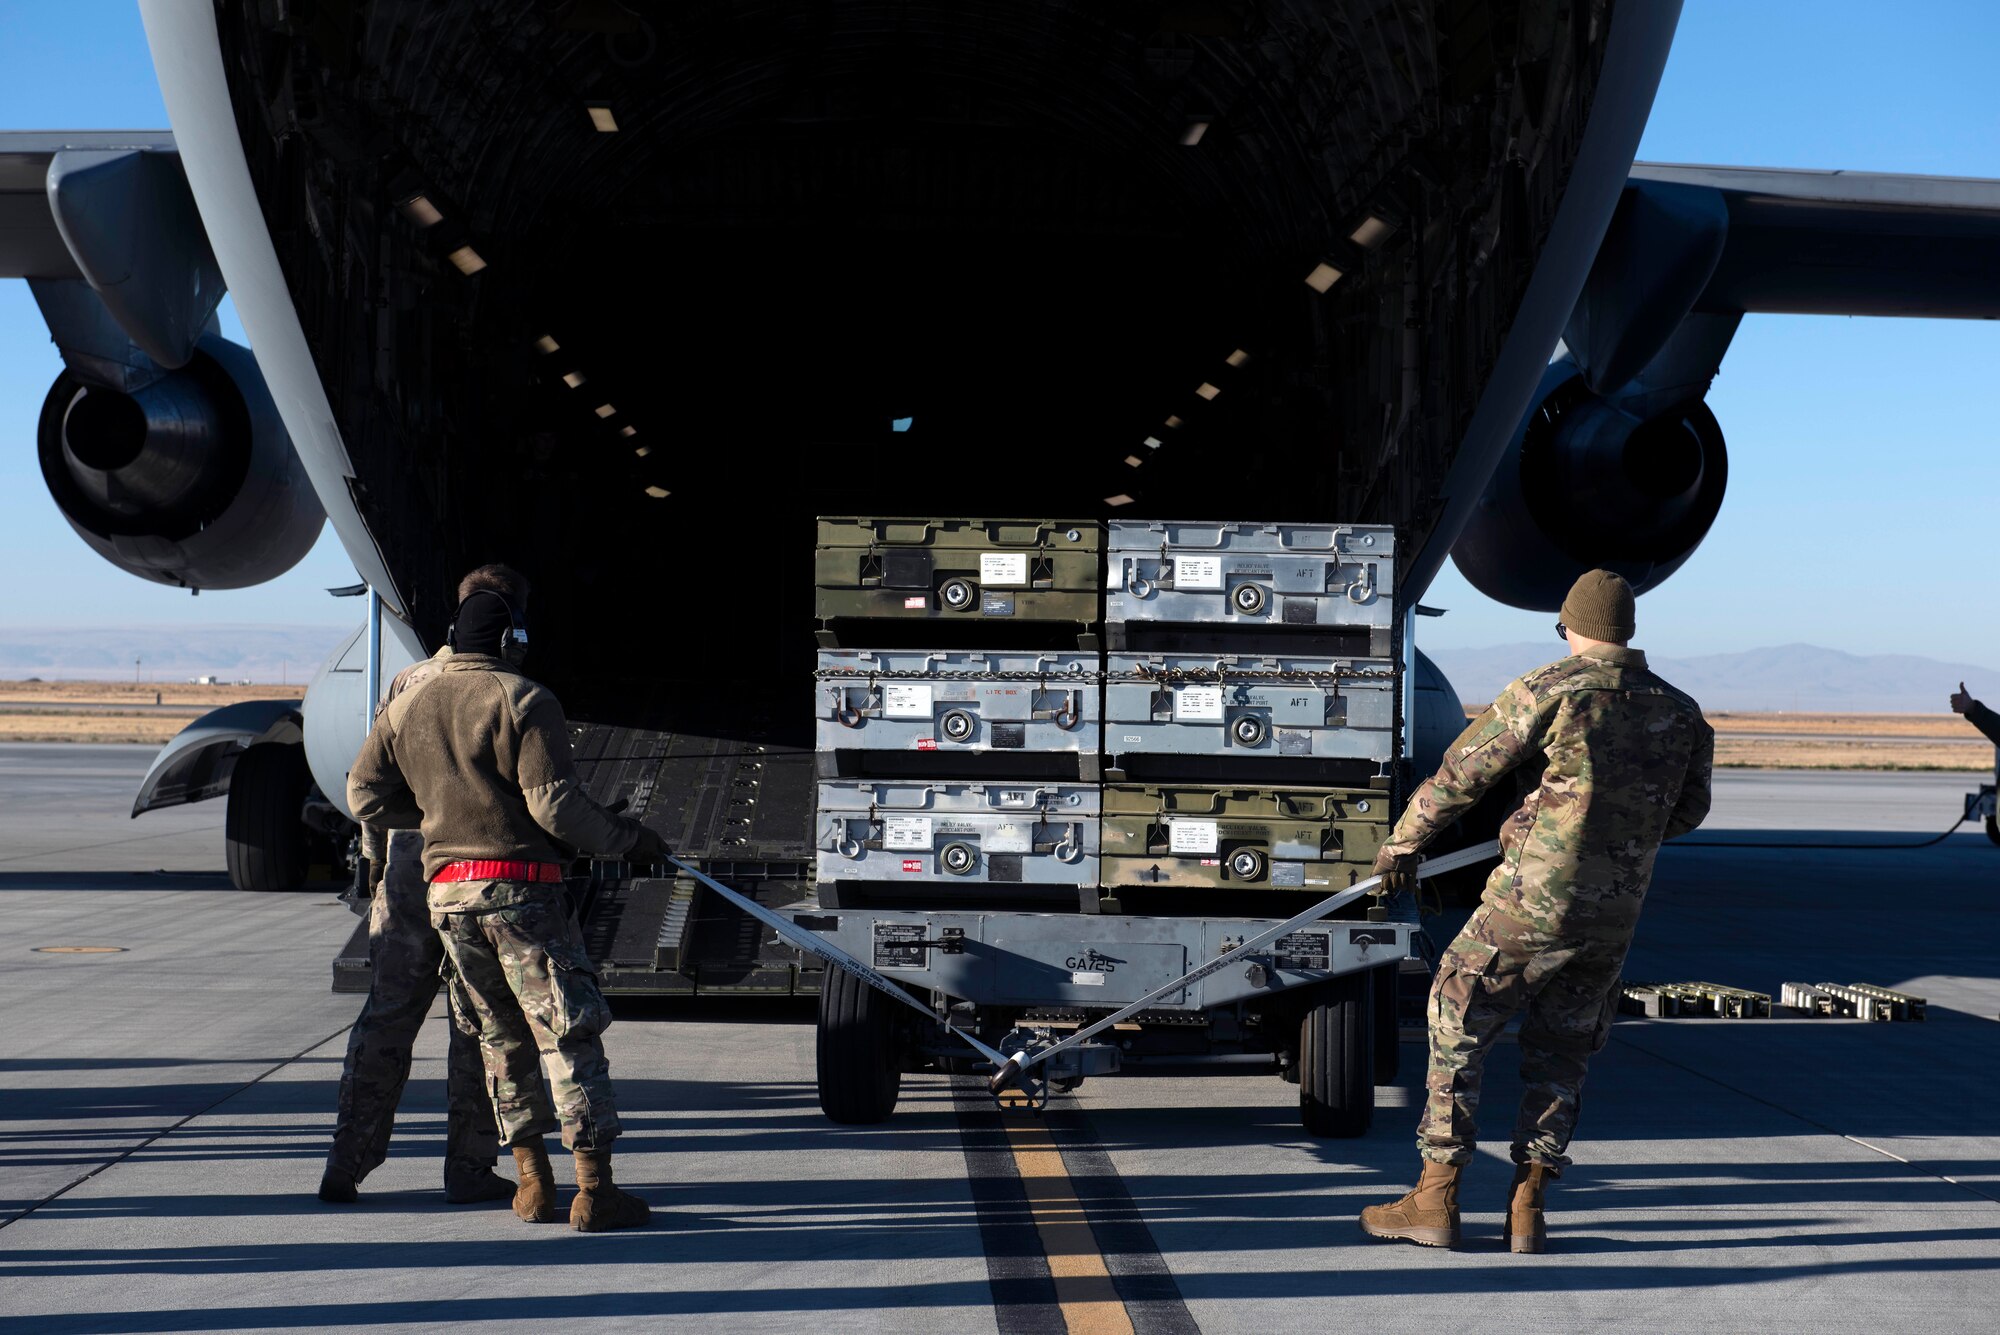 U.S. Airmen with the 62d Aerial Port Squadron load cargo onto a C-17 Globemaster III during Exercise Rainier War 22B at Mountain Home Air Force Base, Idaho, Oct. 17, 2022. In addition to showcasing Air Force Generation prioritization, Rainier War is the 62d Airlift Wing’s full-scale exercise used to train Multi-capable Airmen. (U.S. Air Force photo by Staff Sgt. Zoe Thacker)